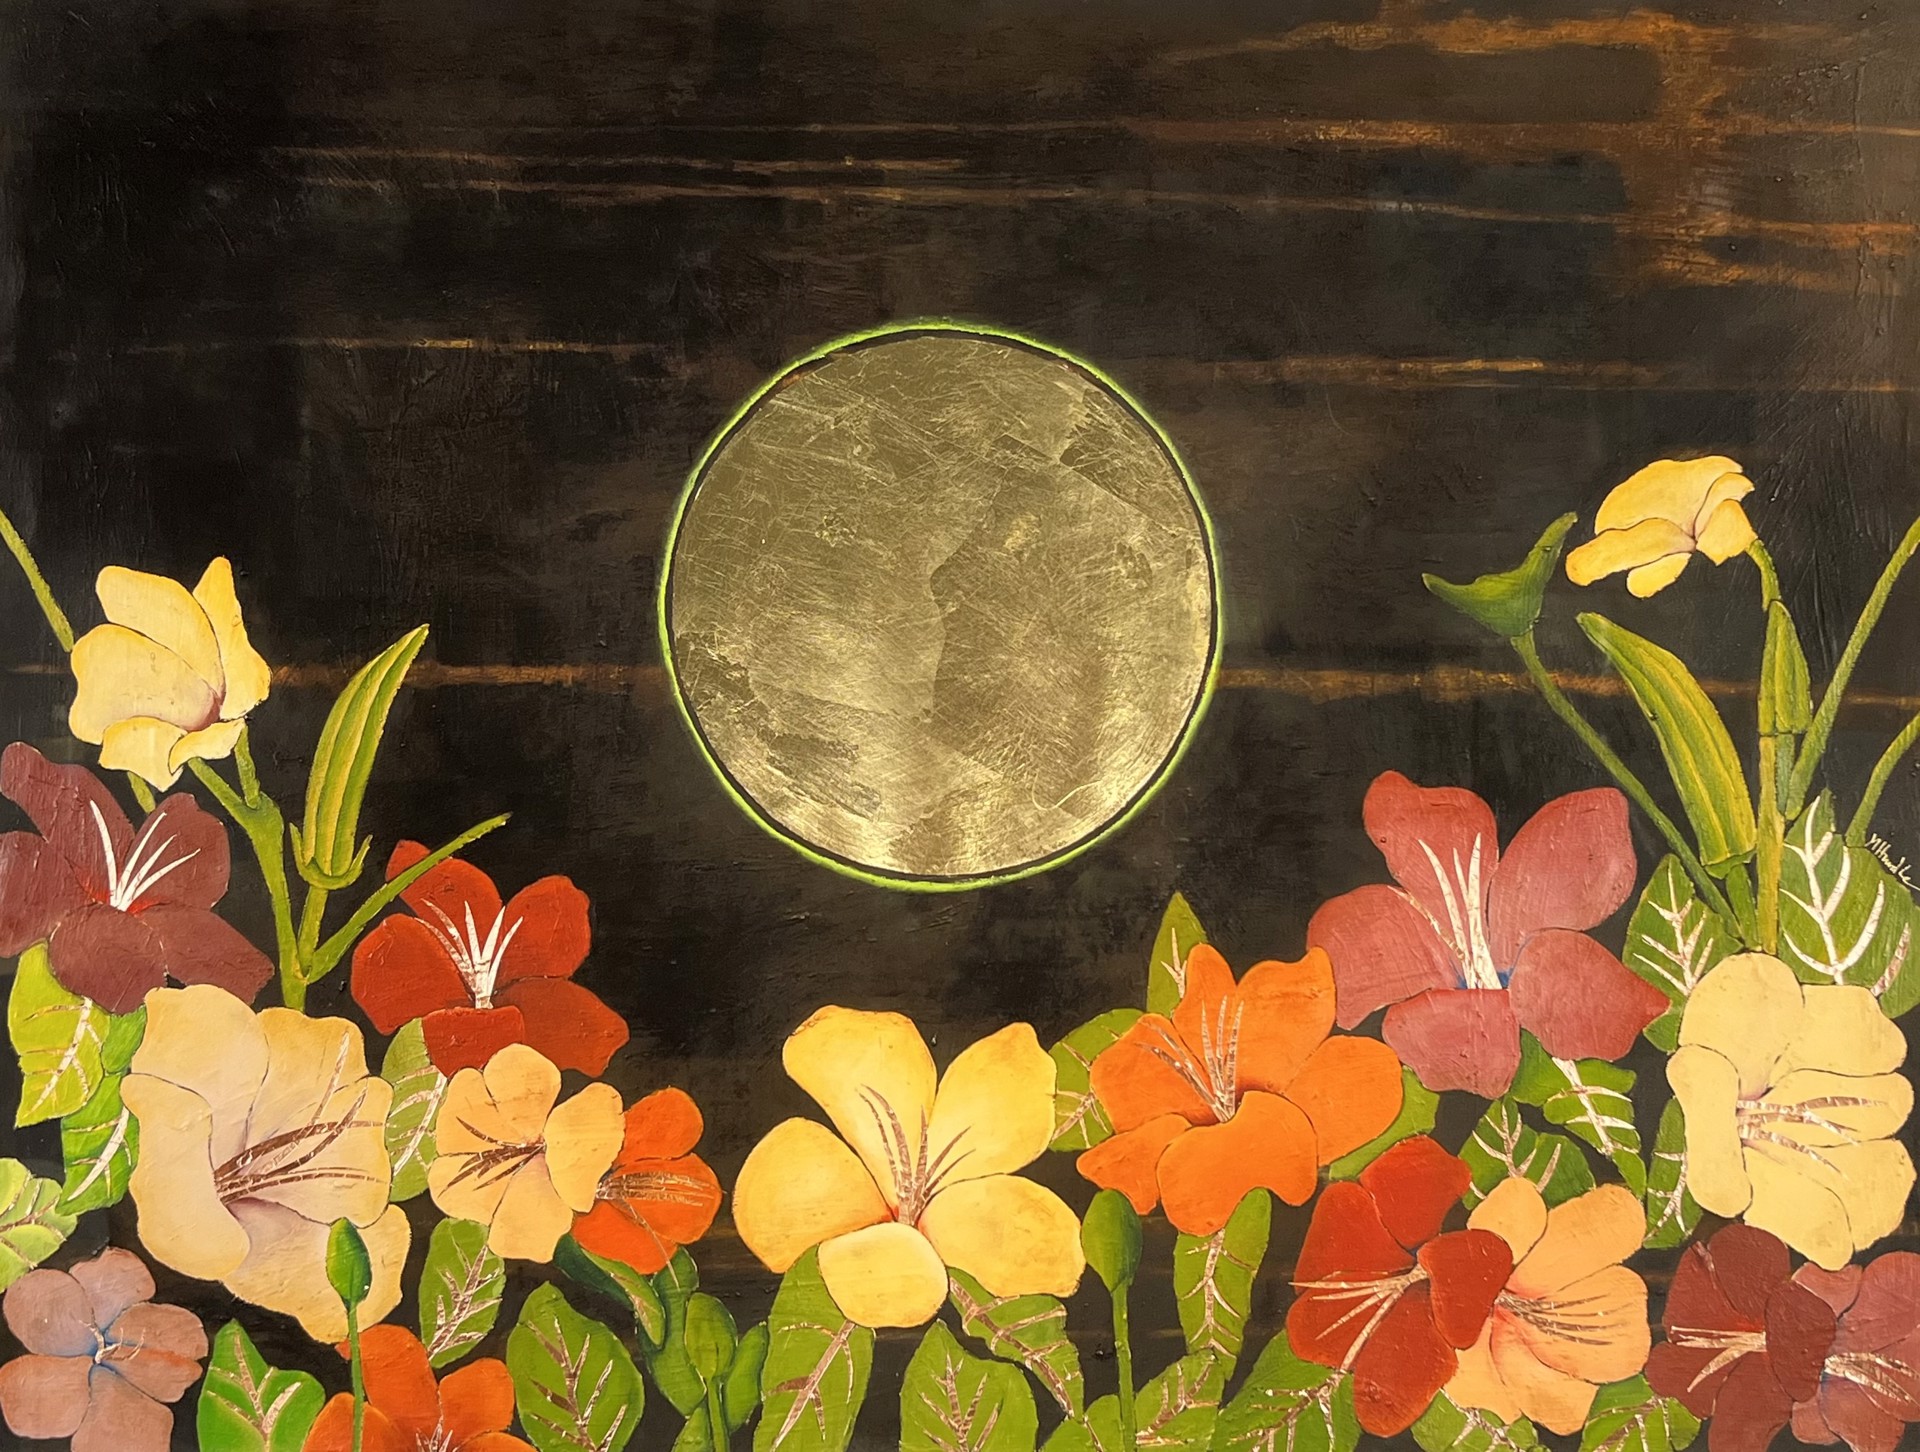 GOLD MOON WITH HIBISCUS by Megan Hurdle